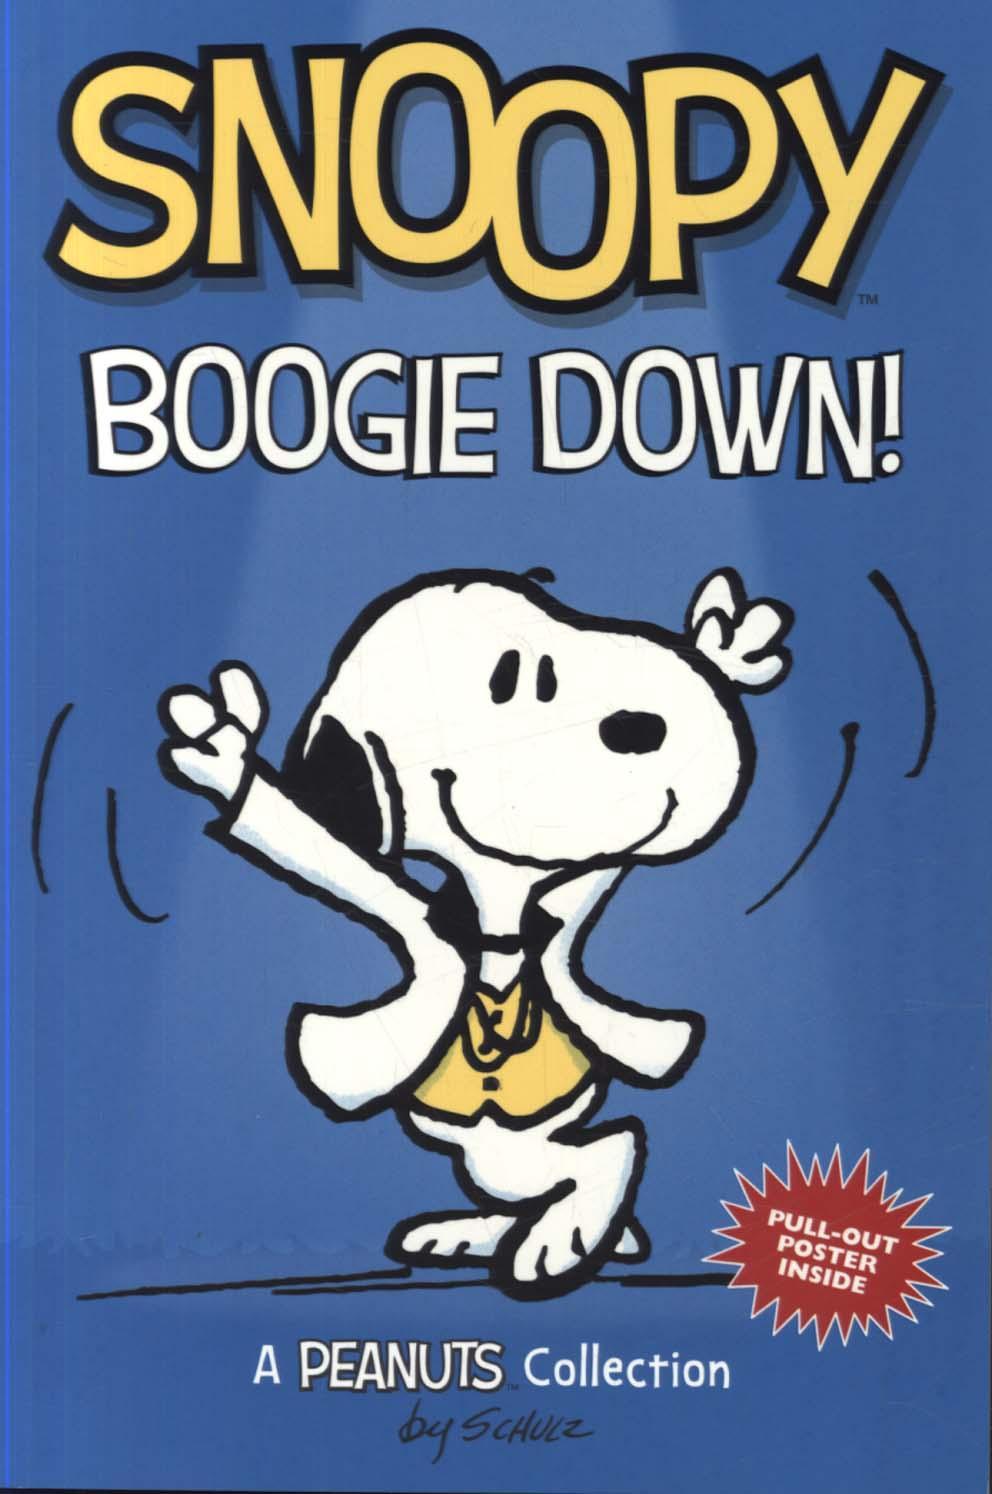 Snoopy: Boogie Down! (PEANUTS AMP Series Book 11)